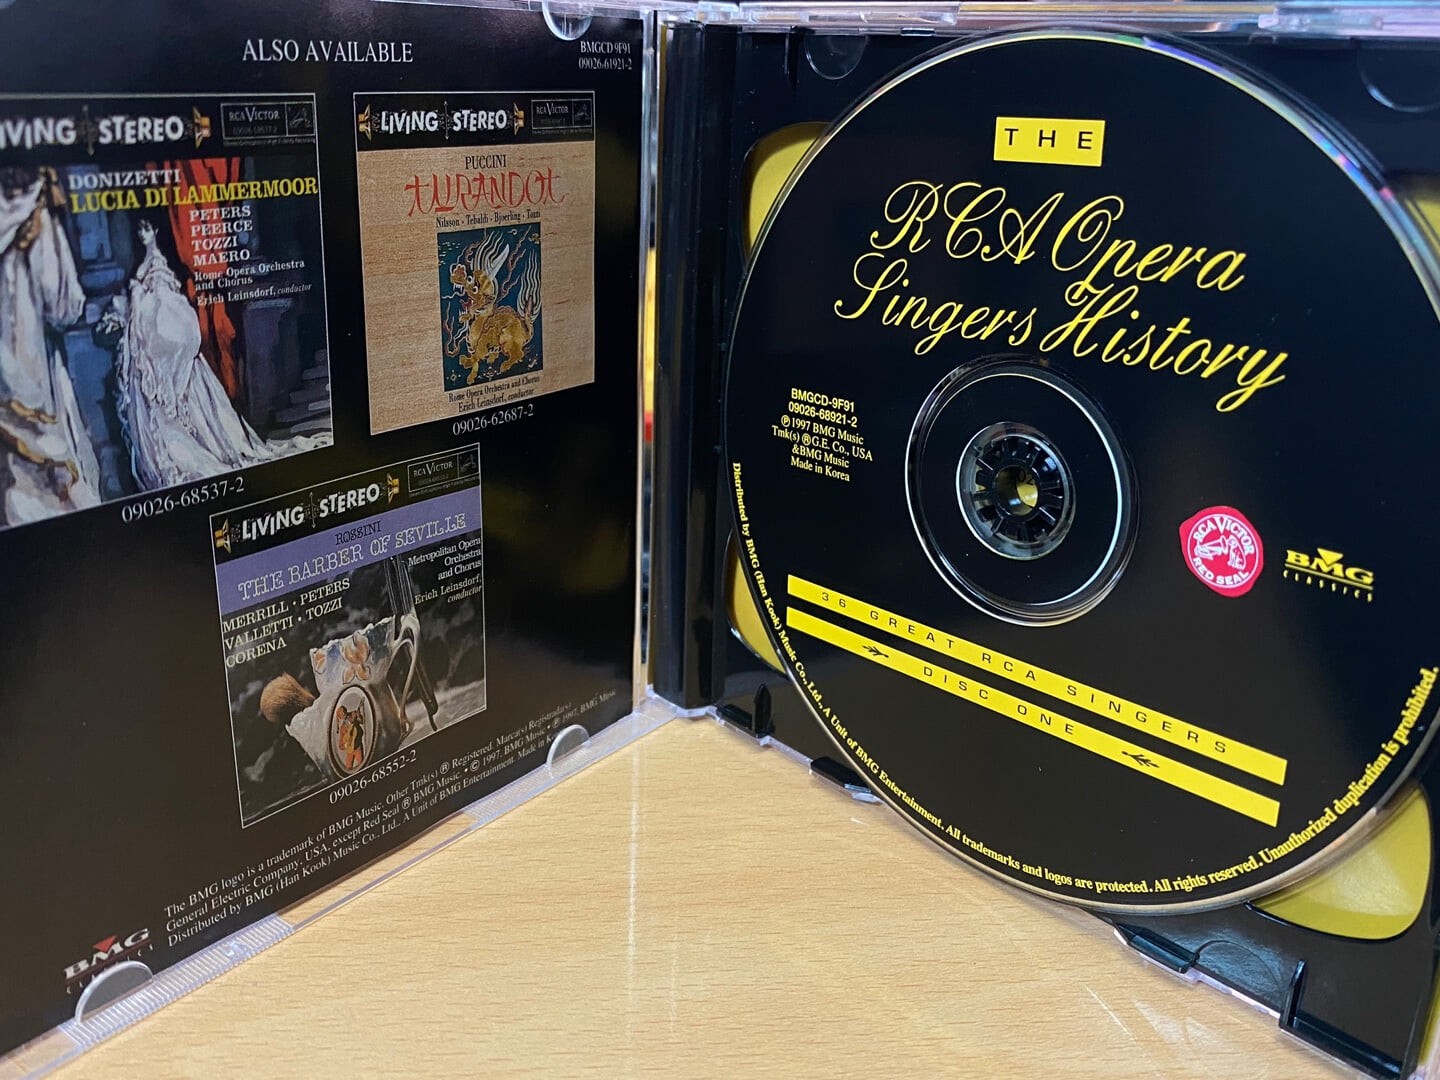 The RCA Opera Singers History - 36 Great RCA Singers 2Cds